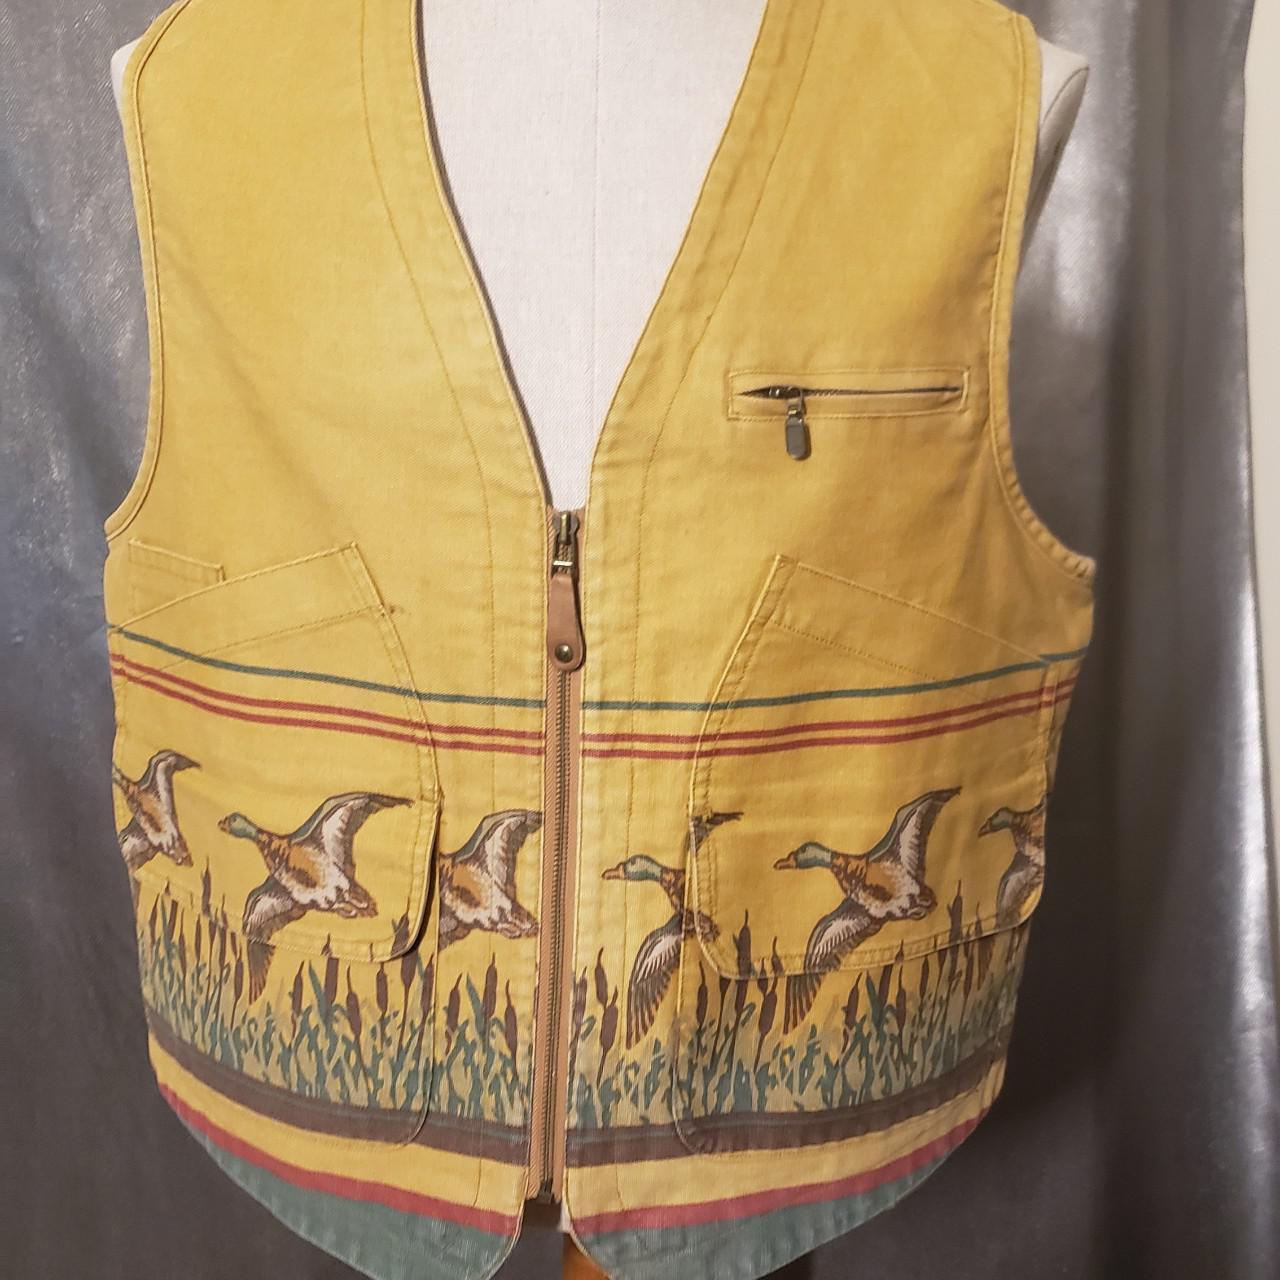 Product Image 1 - Banana Republic duck hunting vest
Size